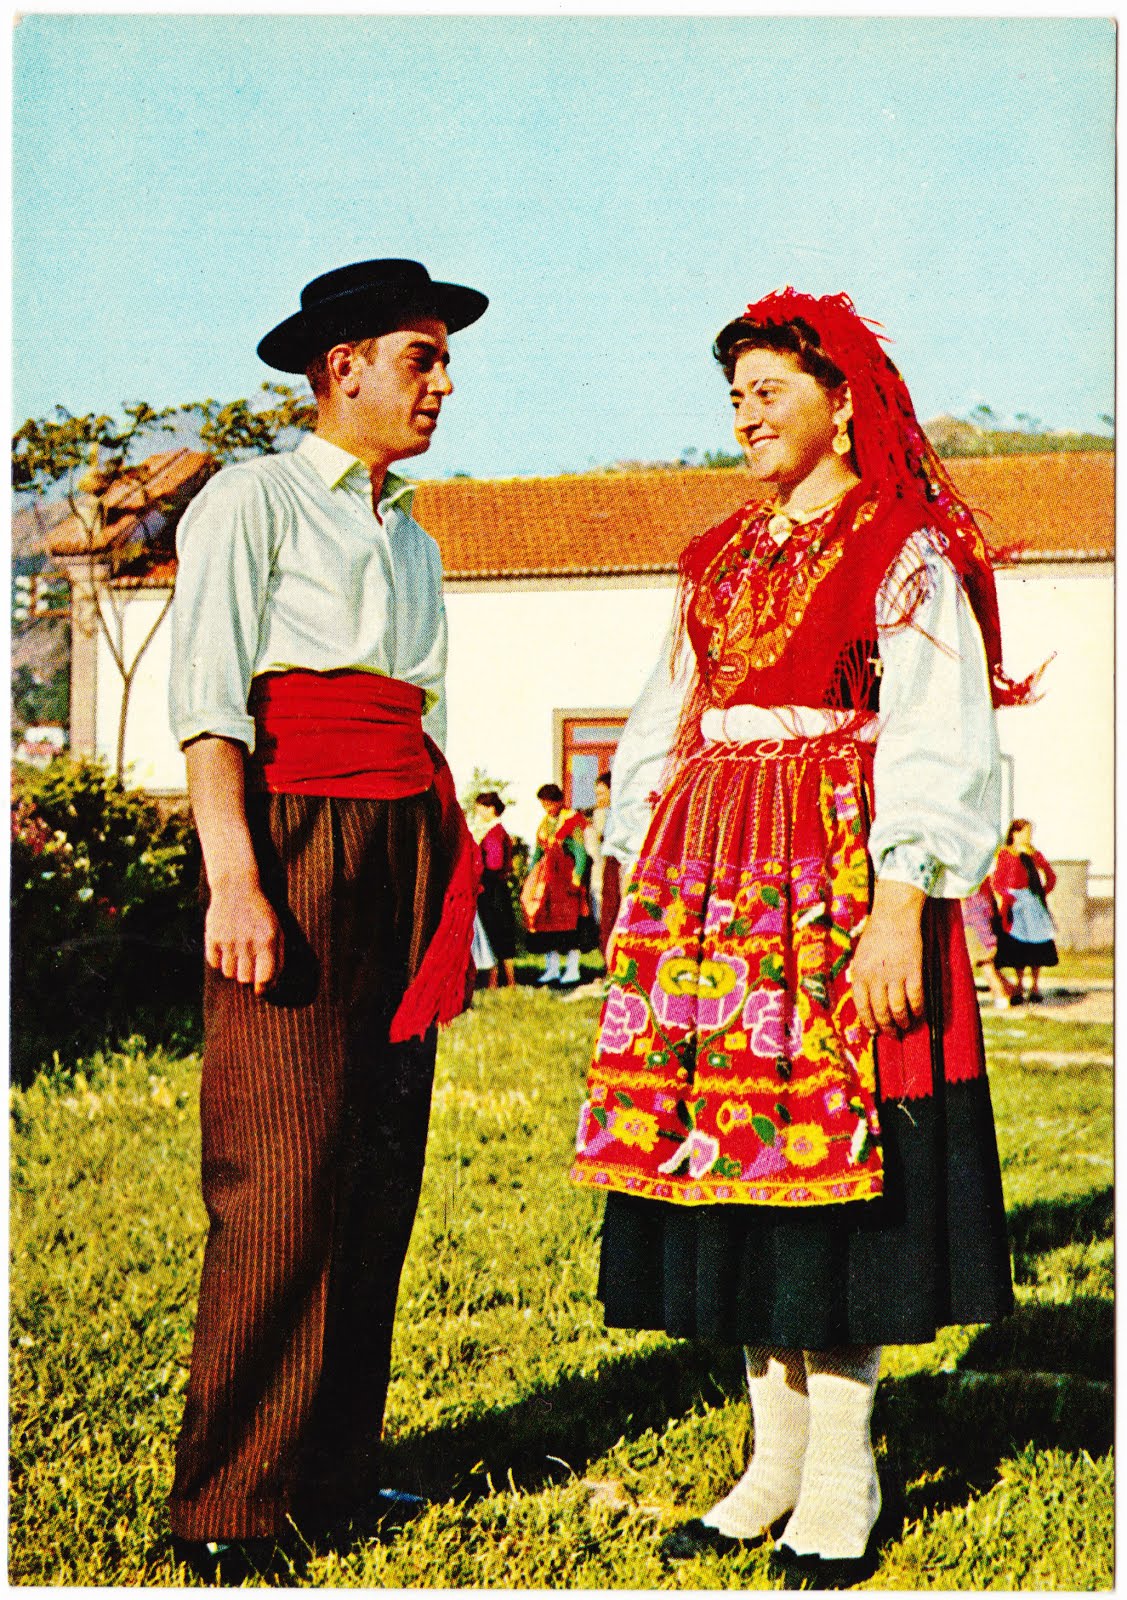 What is traditional Portuguese clothing?